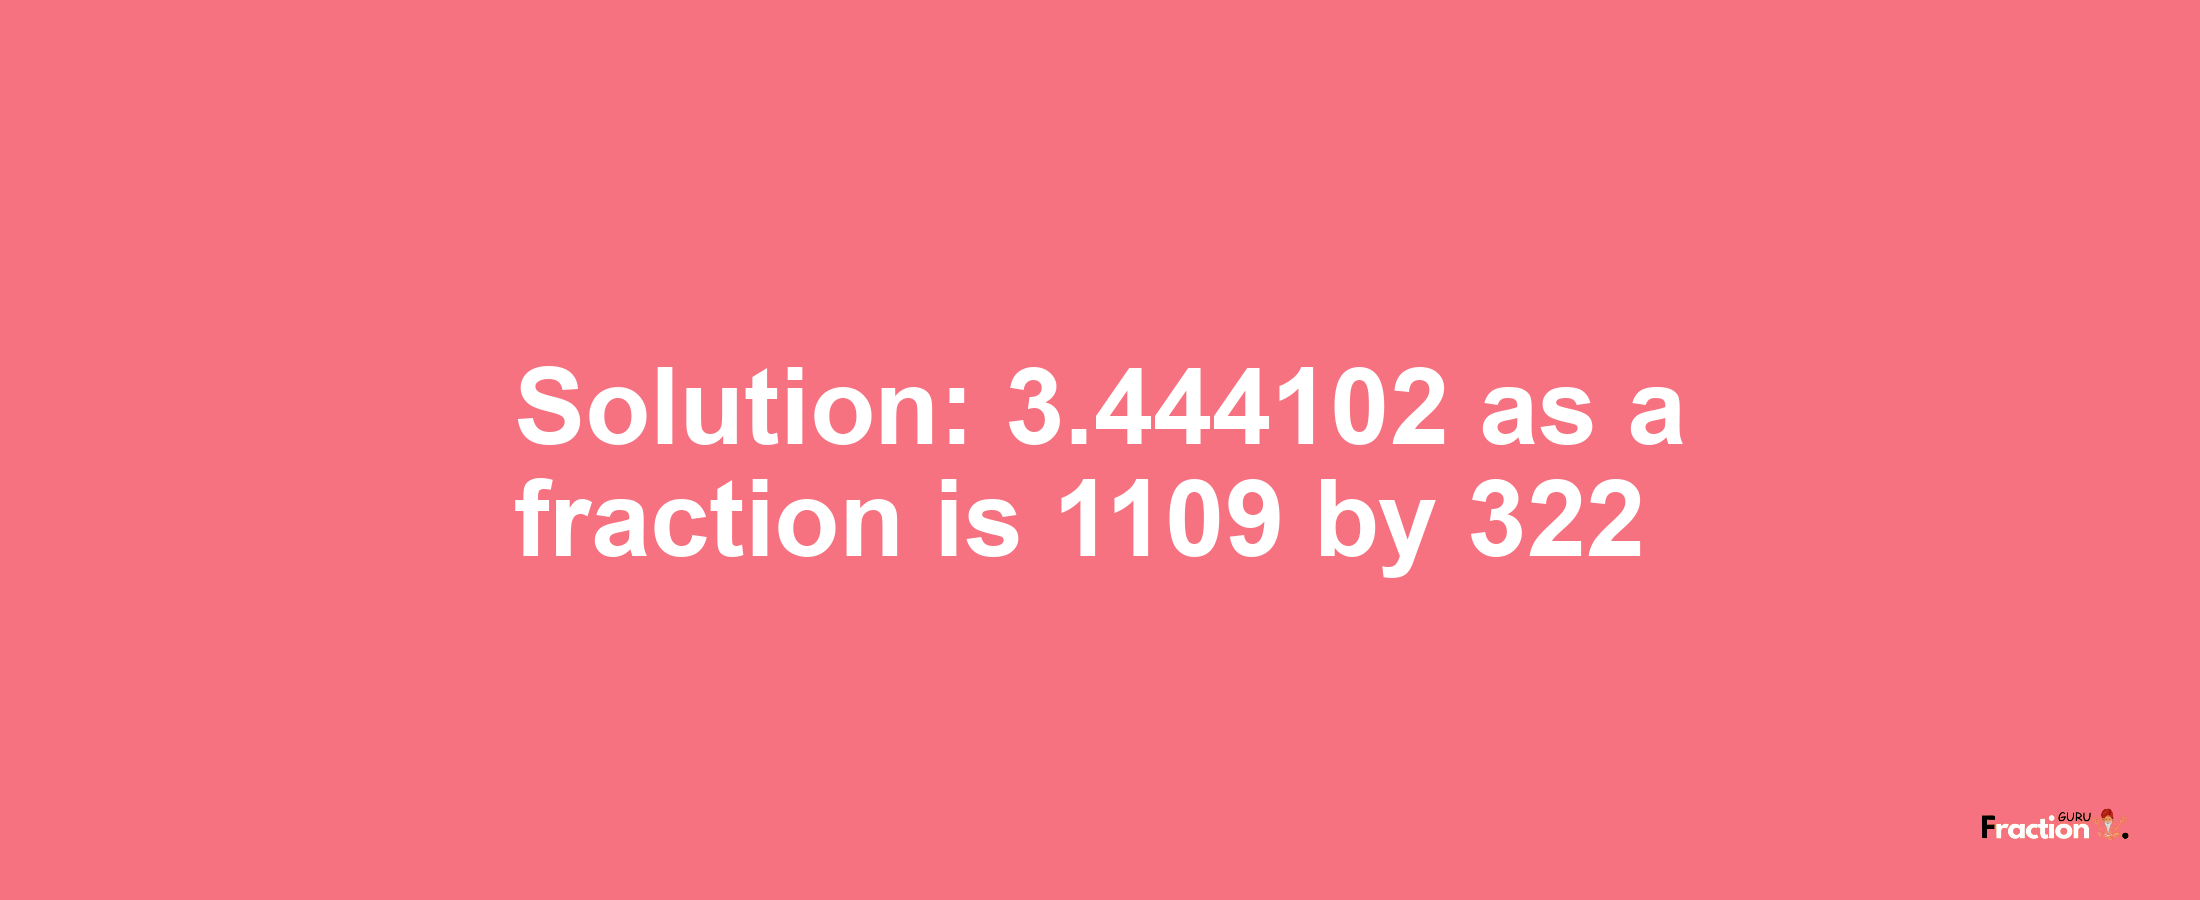 Solution:3.444102 as a fraction is 1109/322